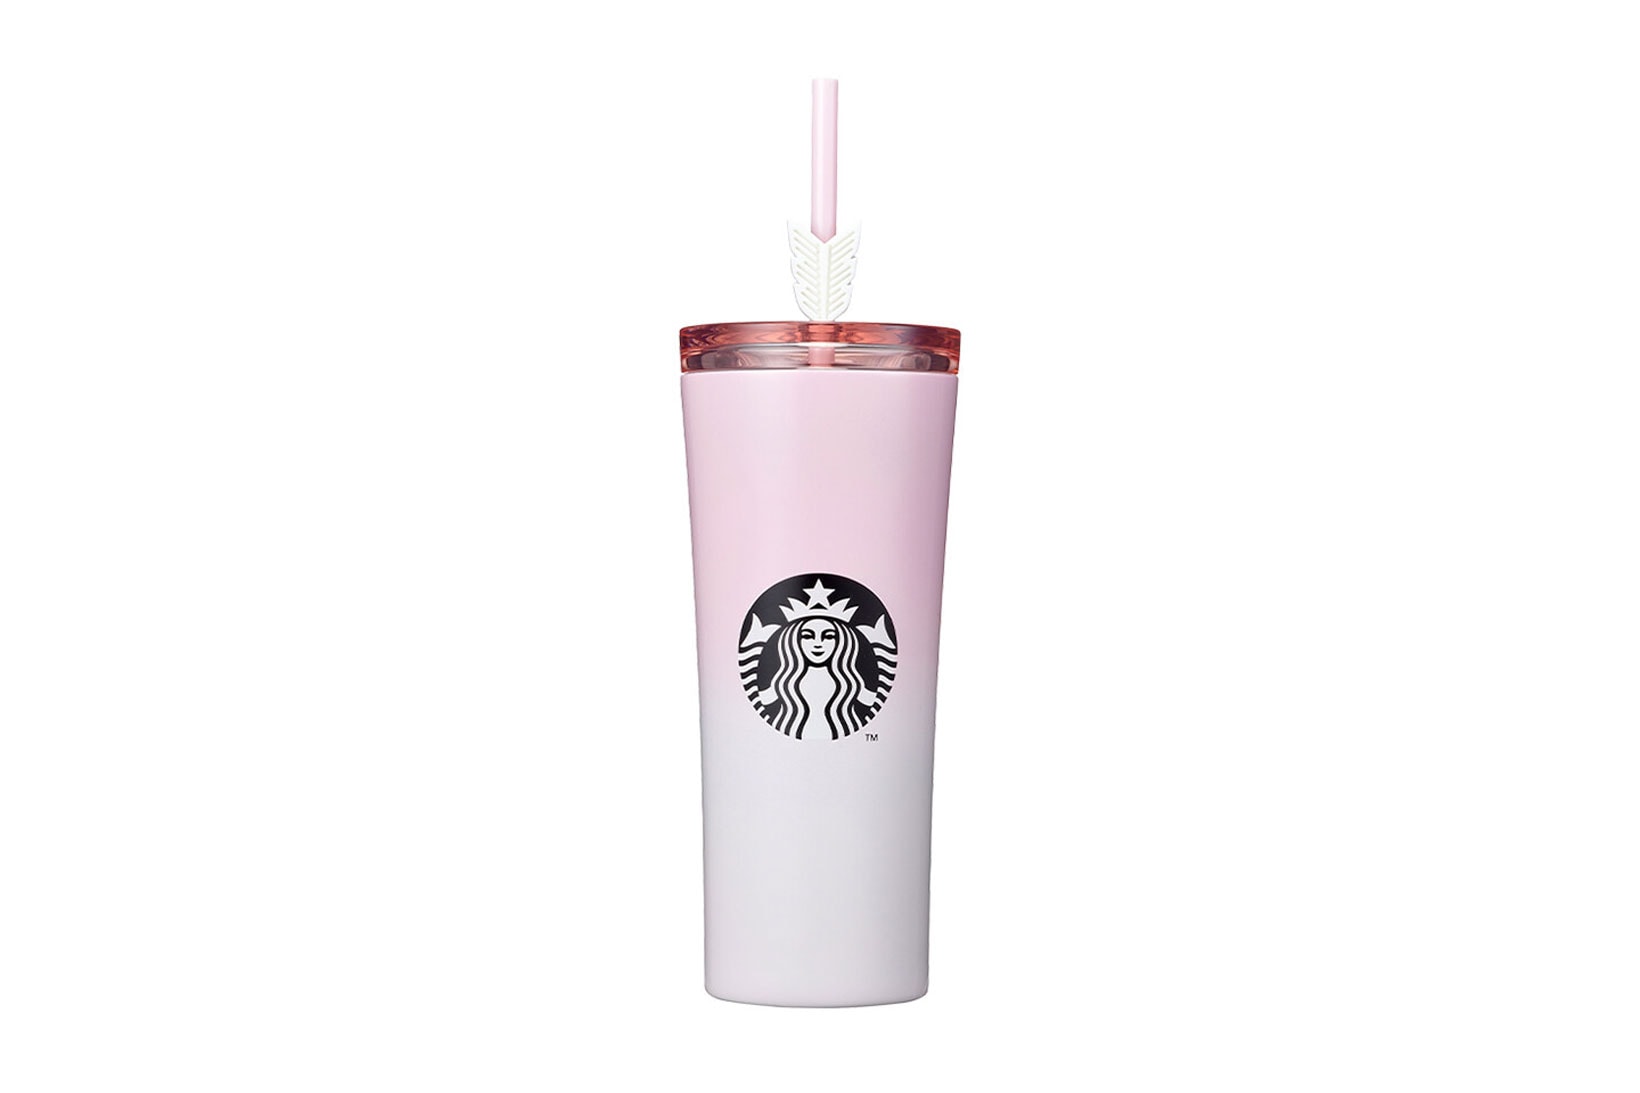 starbucks korea valentines day merch collection cupid phinney tumbler pink